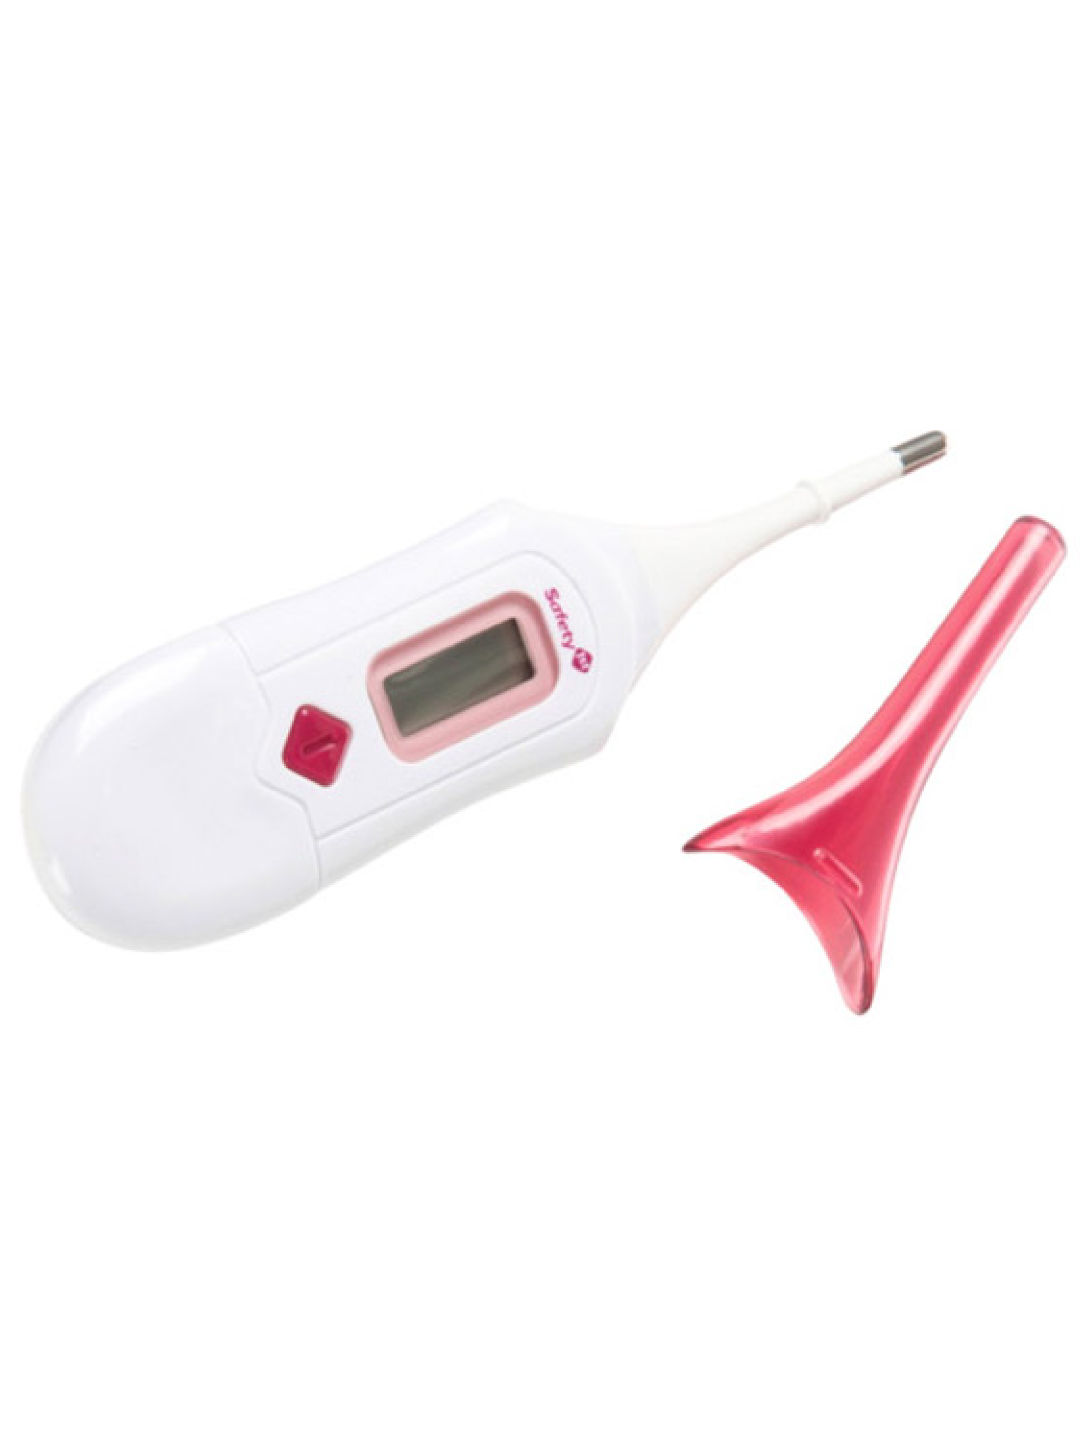 Safety 1st 3-in-1 Nursery Thermometer (Ripe Raspberry- Image 1)